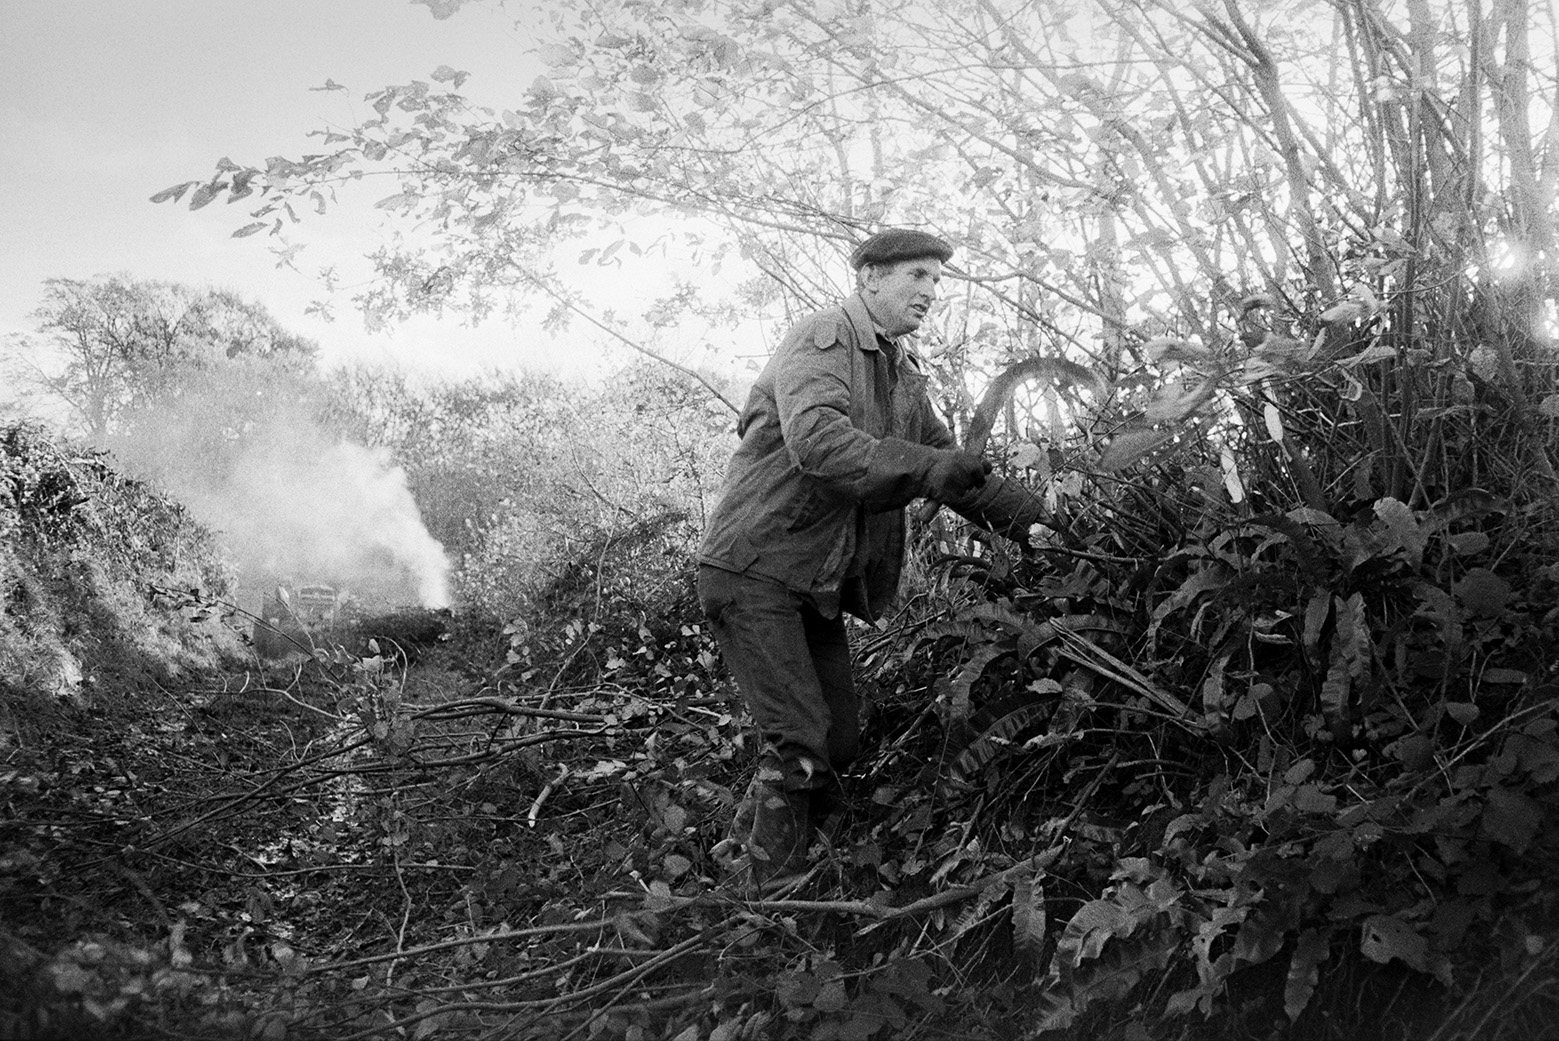 Ivor Bourne trimming a hedge, using a bill hook, in Green Lane, Beaford. Smoke from the burnt cuttings can be seen in the background.